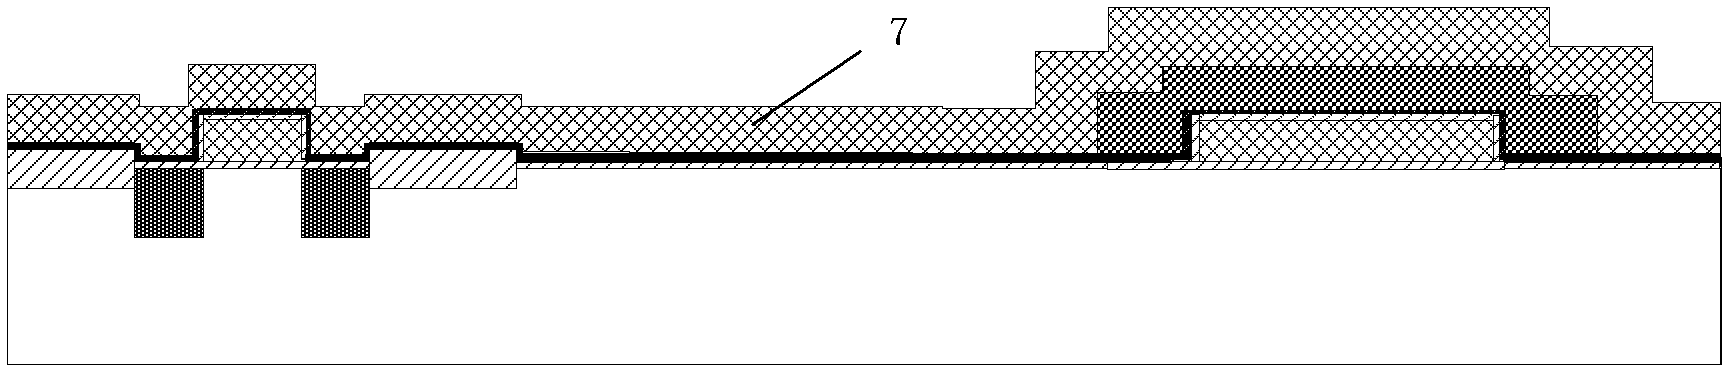 MEMS (micro-electromechanical system) and IC (integrated circuit) monolithical integration method